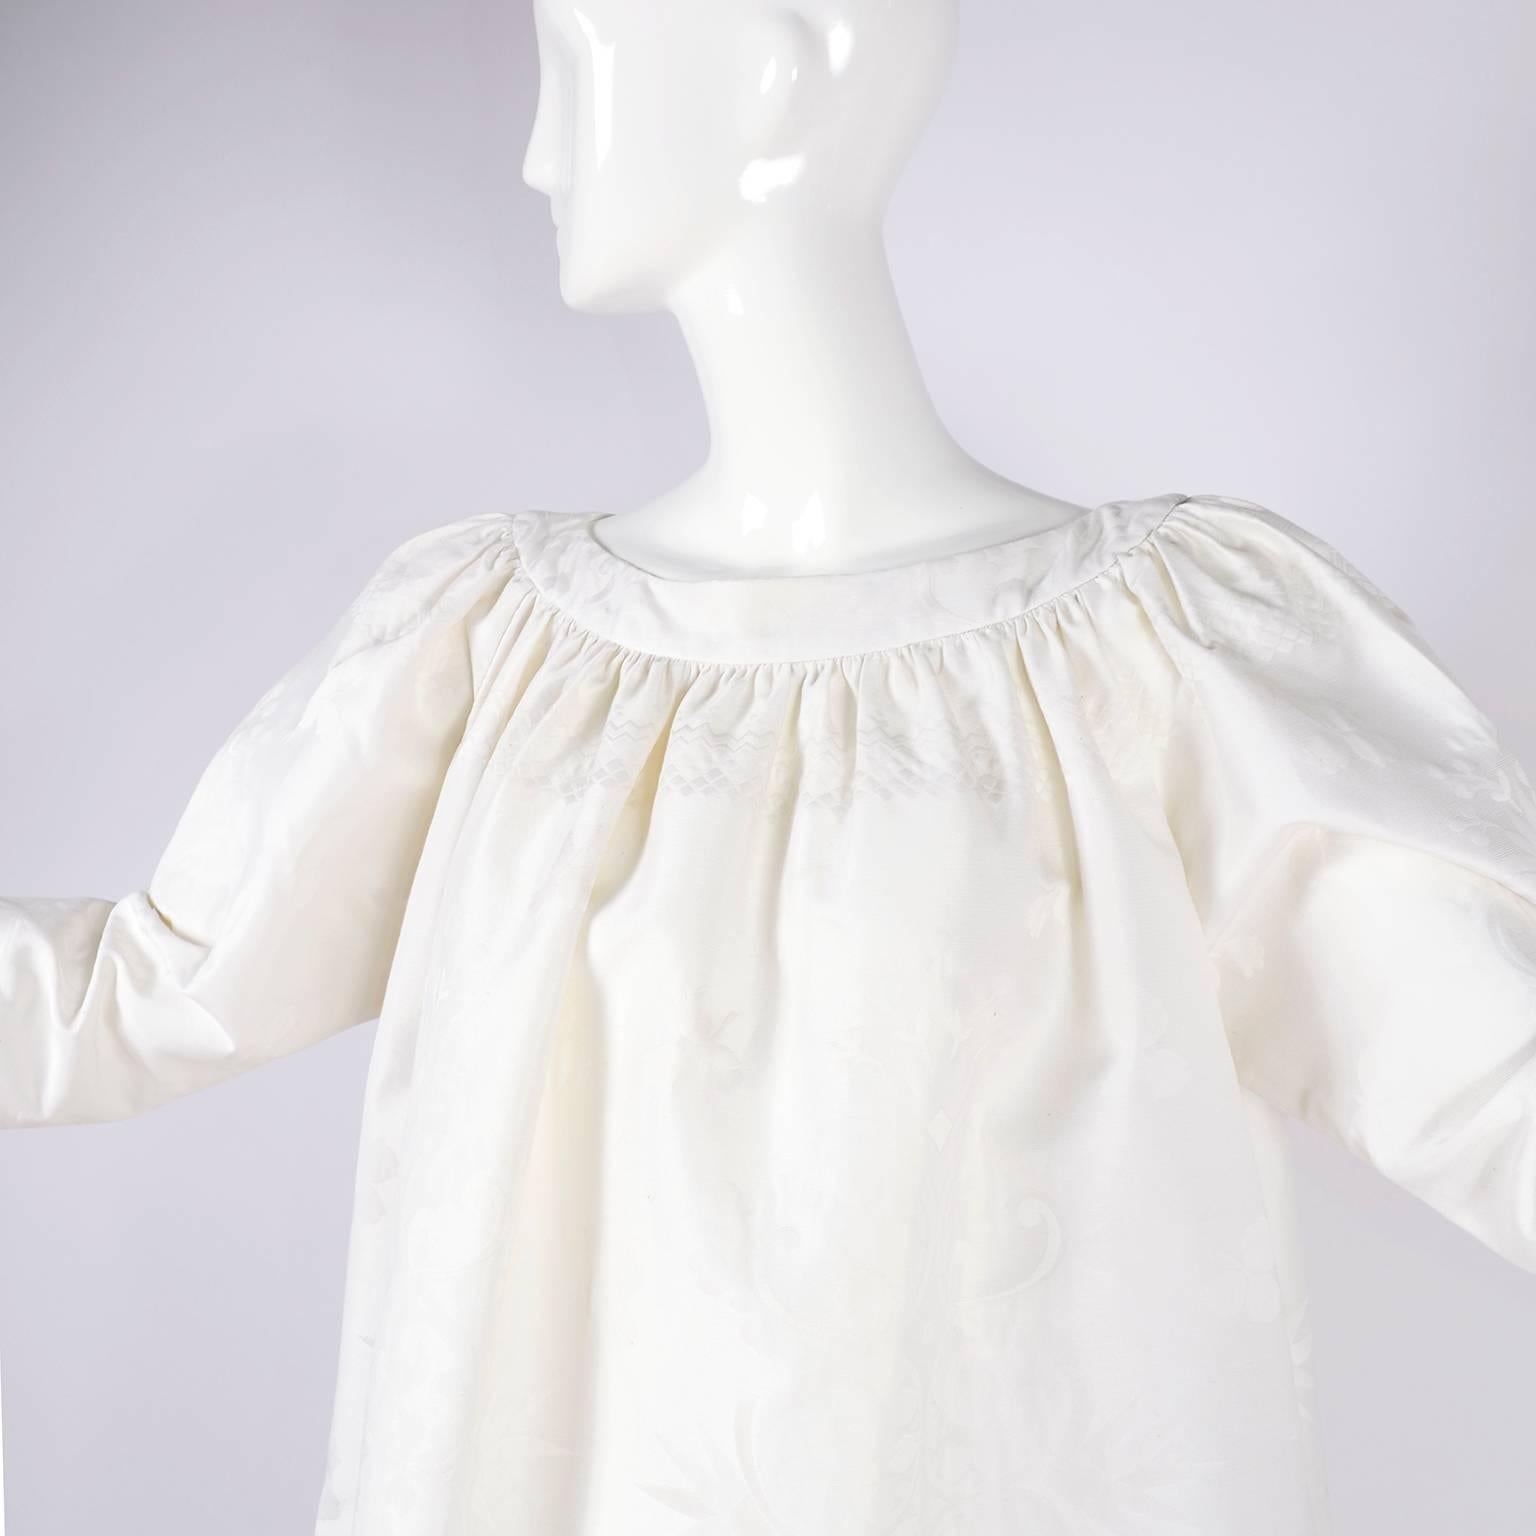 This is a fabulous summer dress or tunic from Christian Lacroix from the 1980's in white linen. Though labeled a French size 38, this dress is oversized and almost a one size fits all. This wonderful tone on tone white damask patterned dress fits up